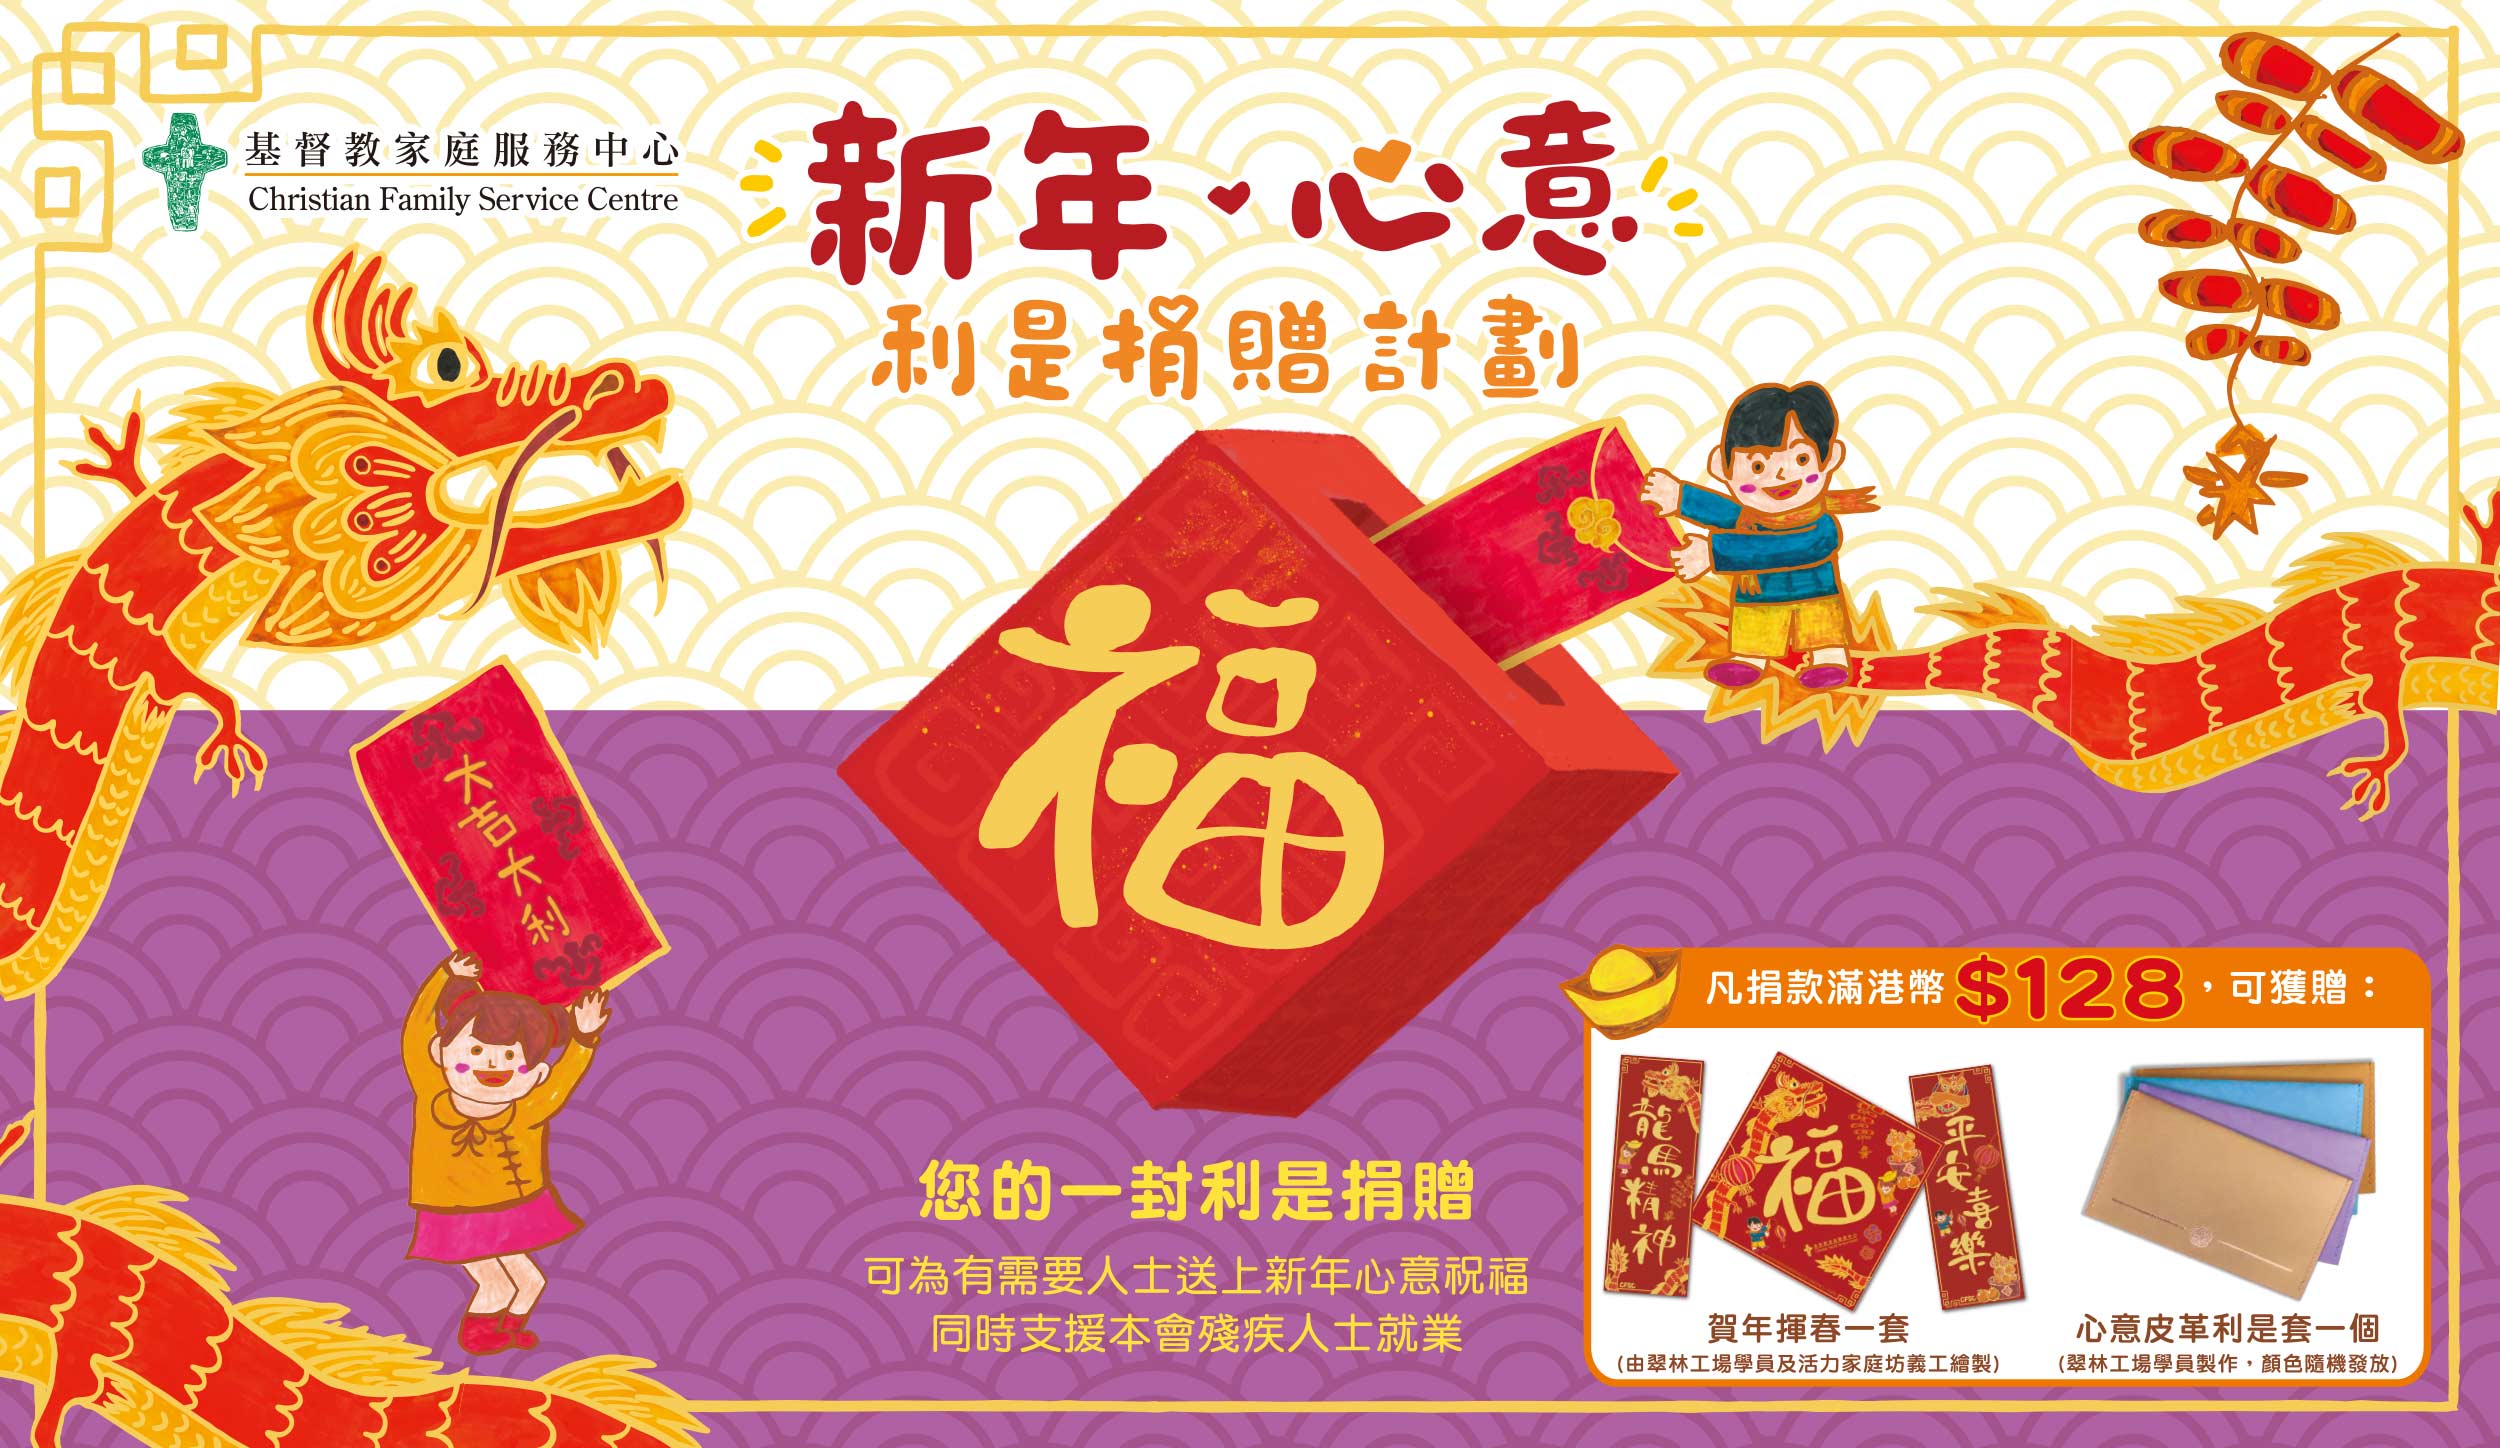 Cover Image - CFSC Chinese New Year Red Pocket Donation